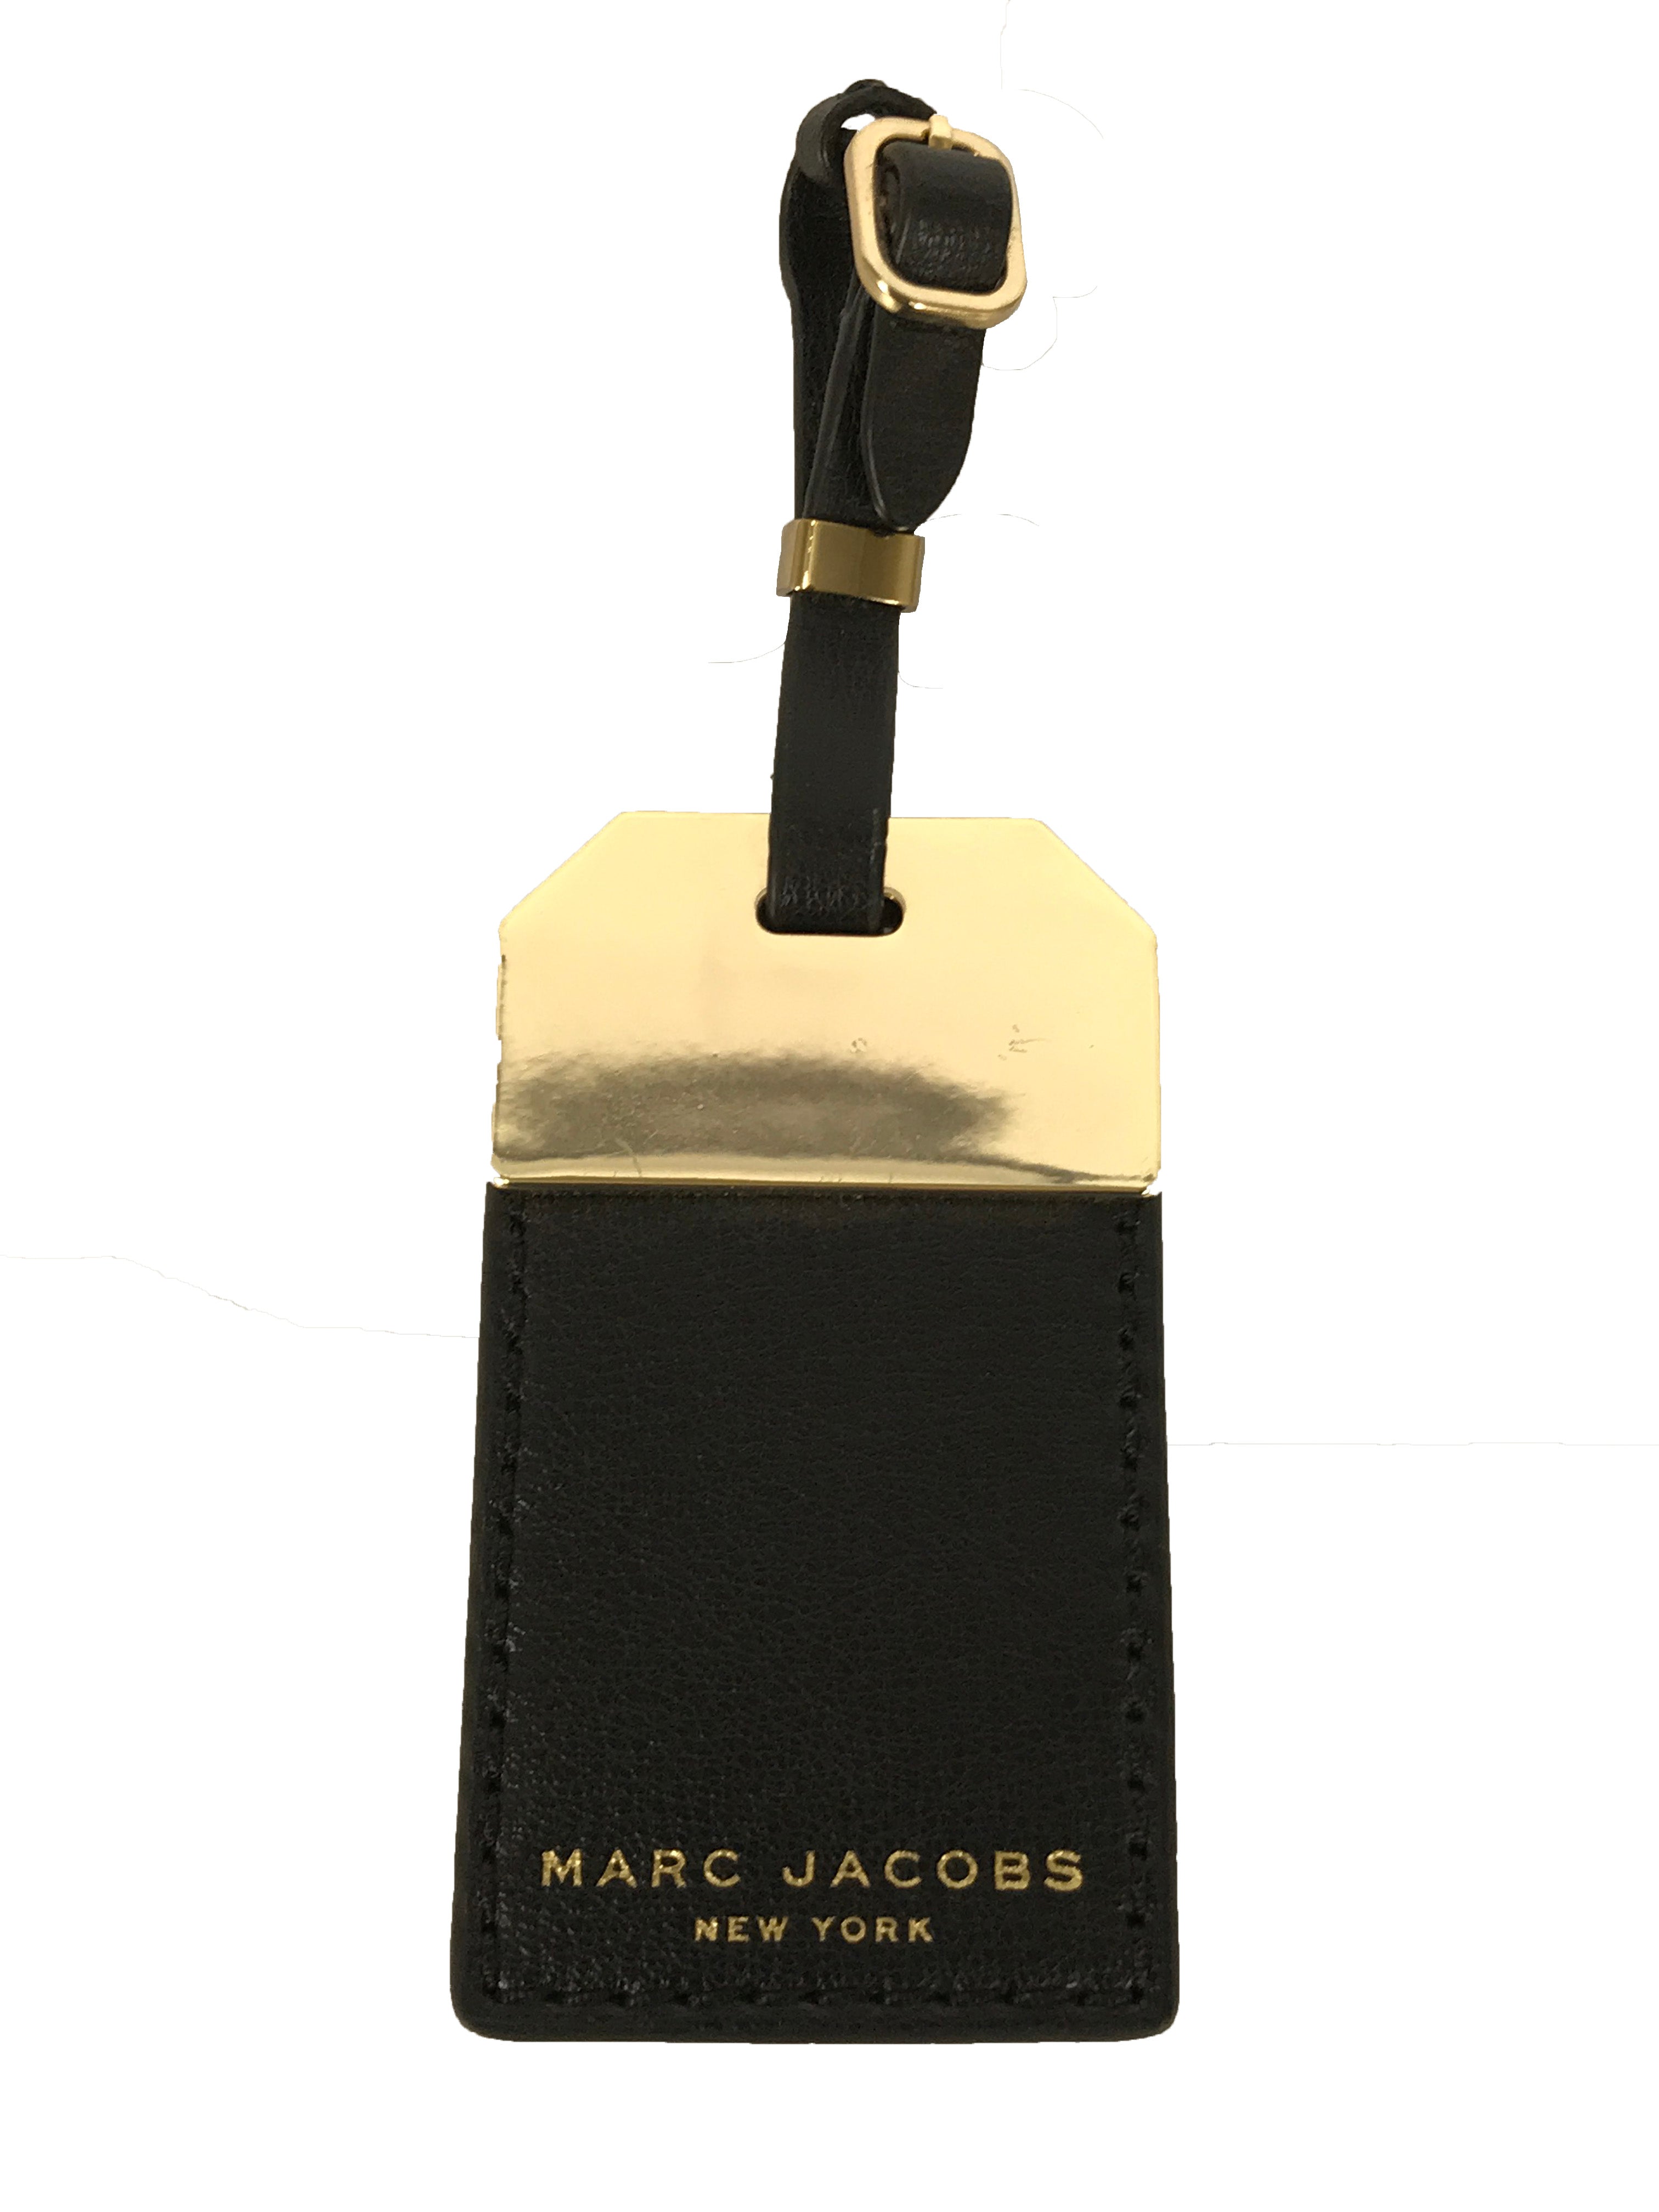 Marc Jacobs Black and Gold Luggage Tag